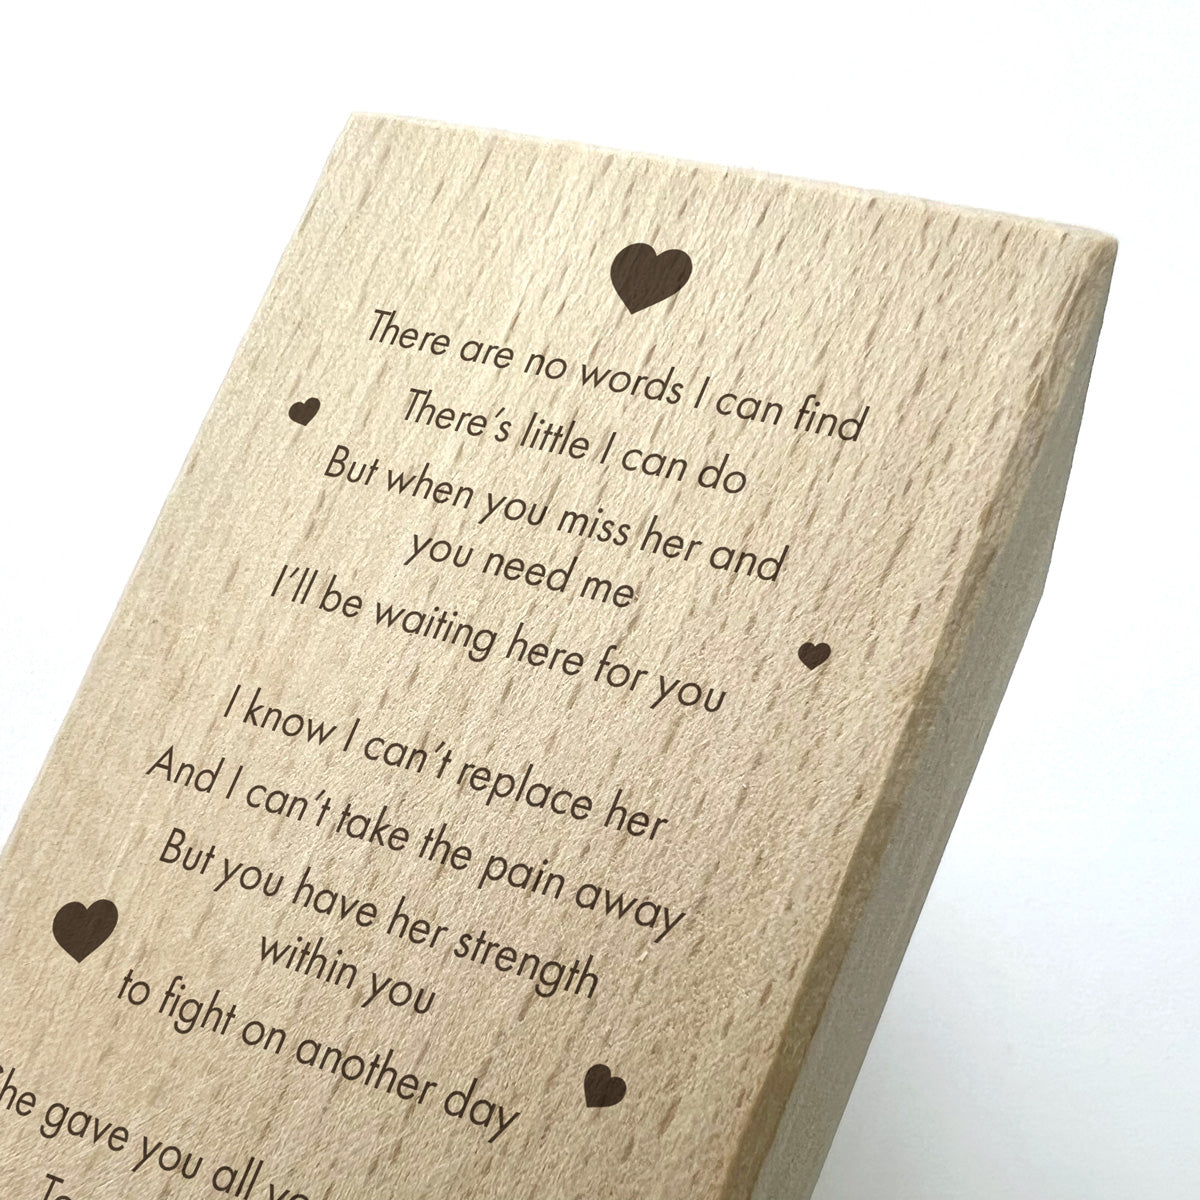 "Her Strength Within You" Wooden Tea Light Holder